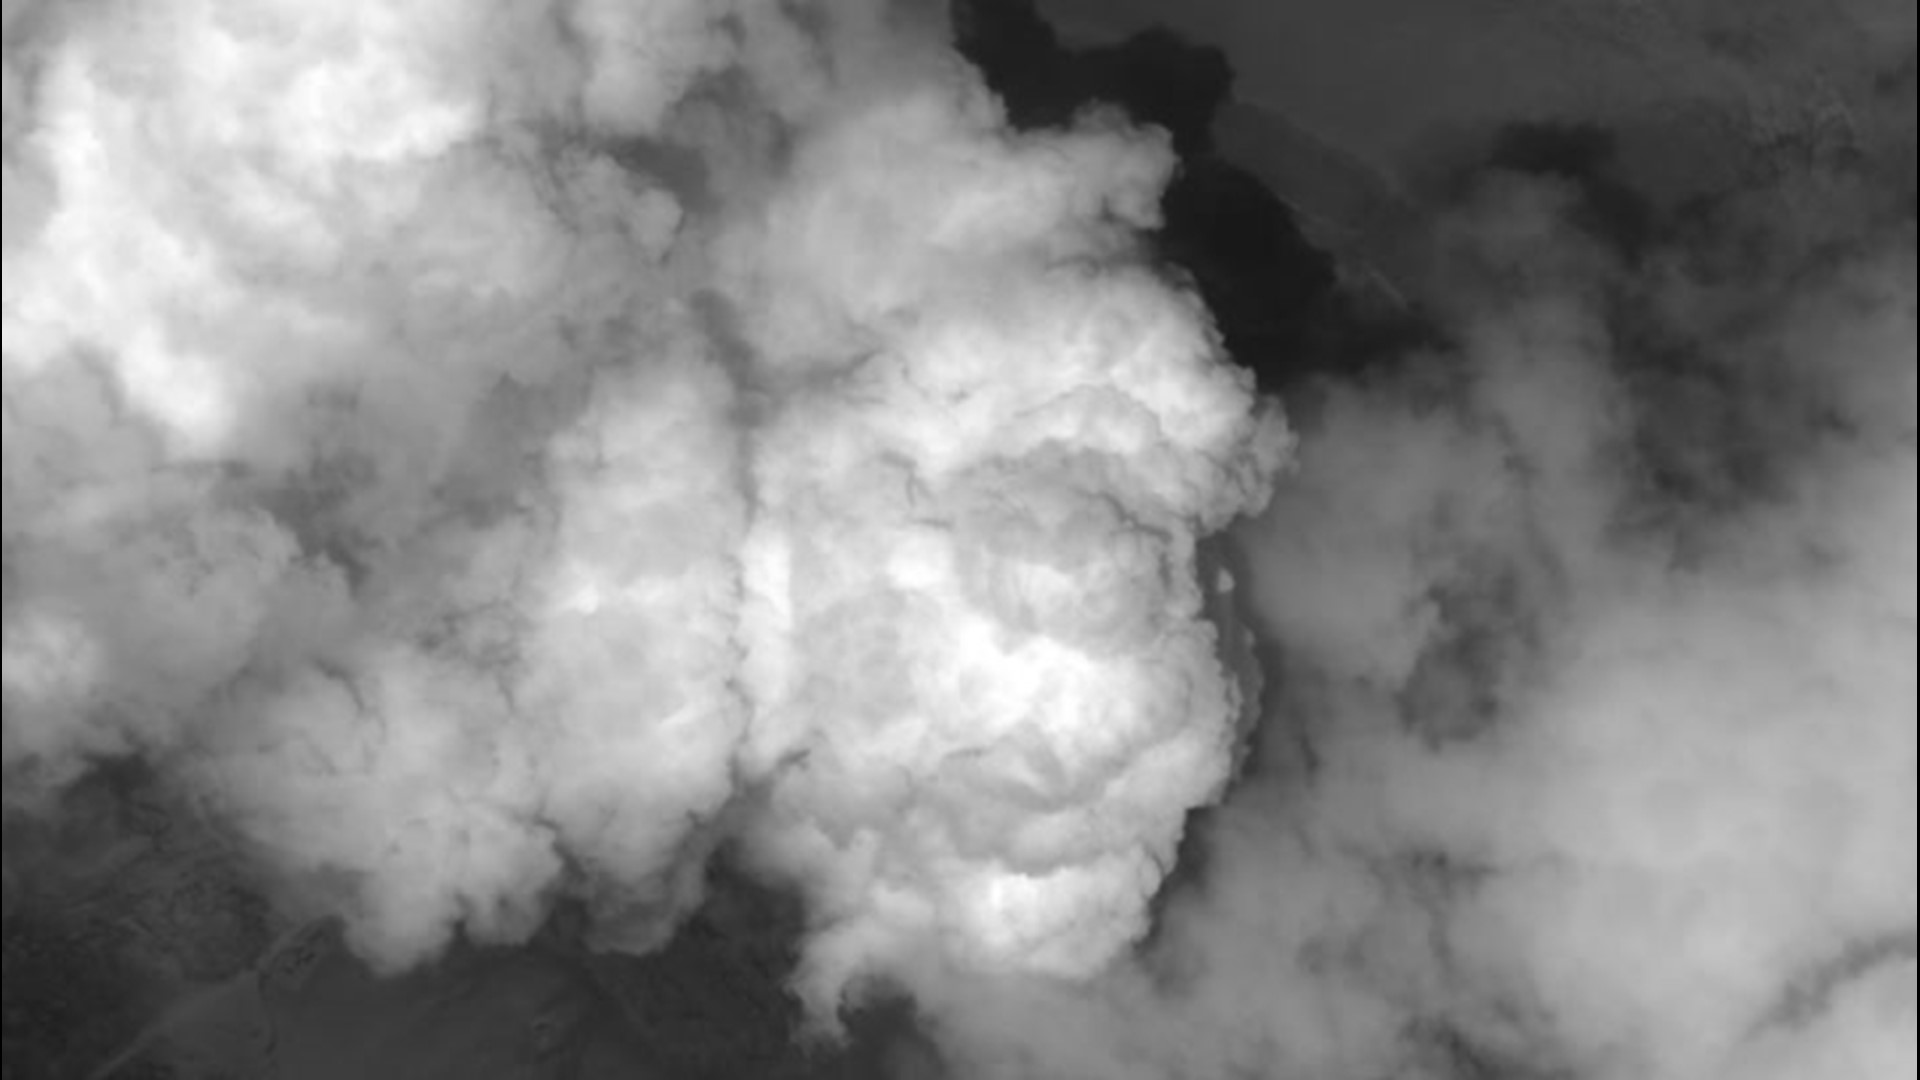 The La Soufriere volcano continues to erupt, spreading ash over more than 900 miles of the Atlantic Ocean. On April 16, a satellite captured a huge plume of ash and water vapor rising above the volcano.